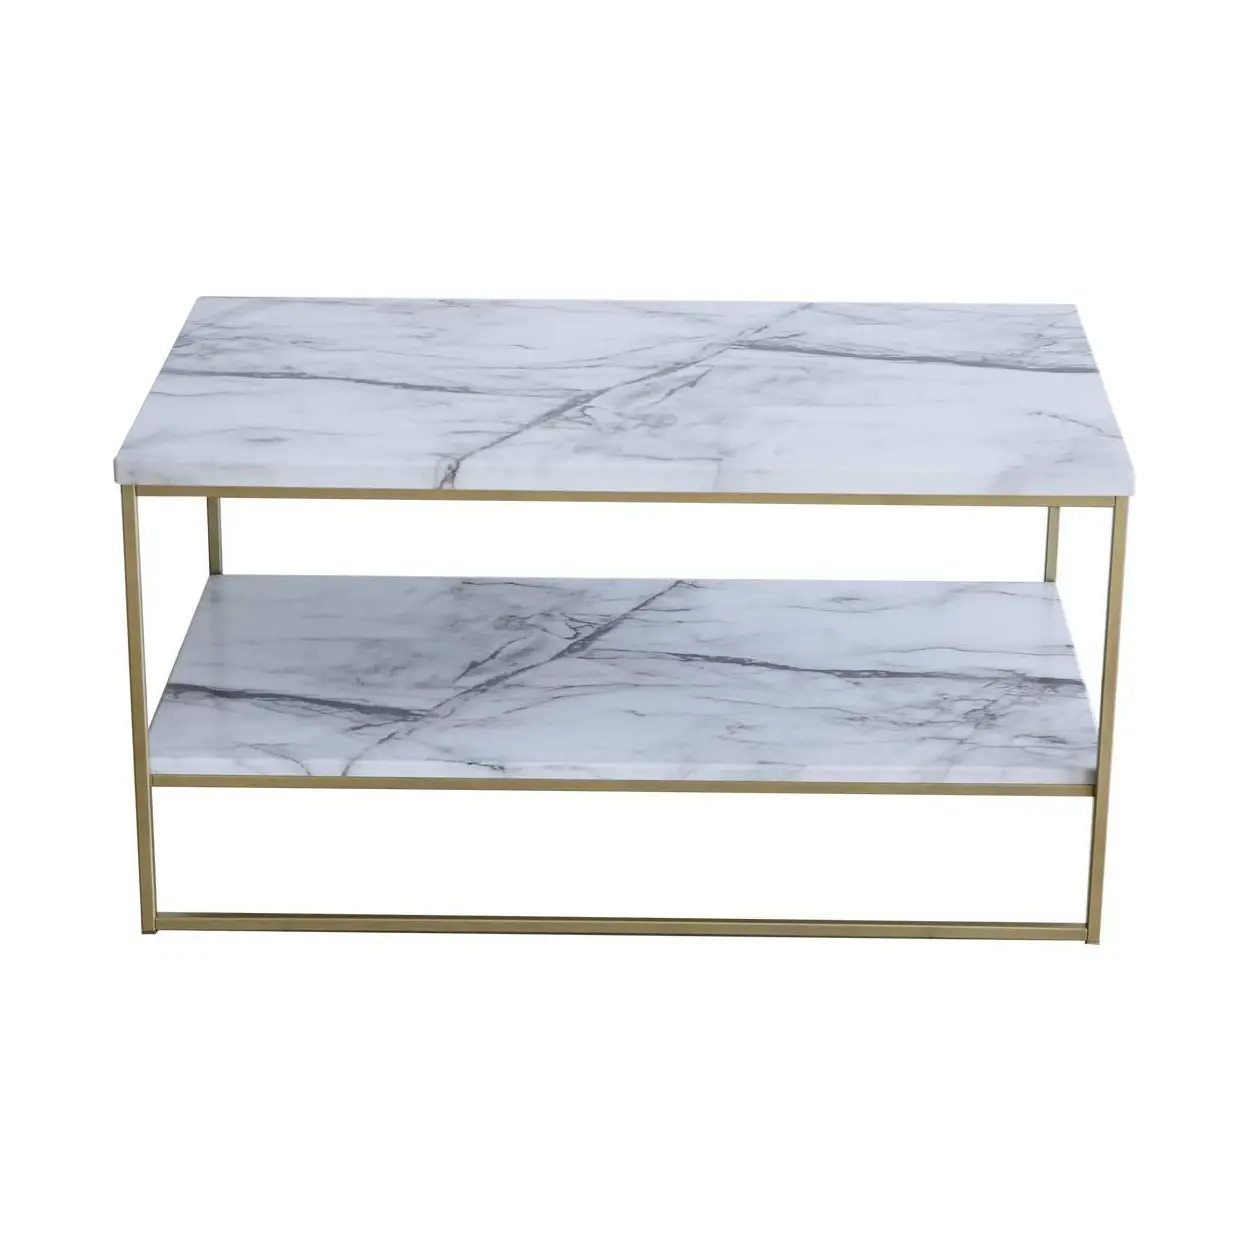 Hot Sale Home Furniture White Marble Print Coffee Table With Gold Metal Legs 2 Tier Living Room Tea Table For Kitchen